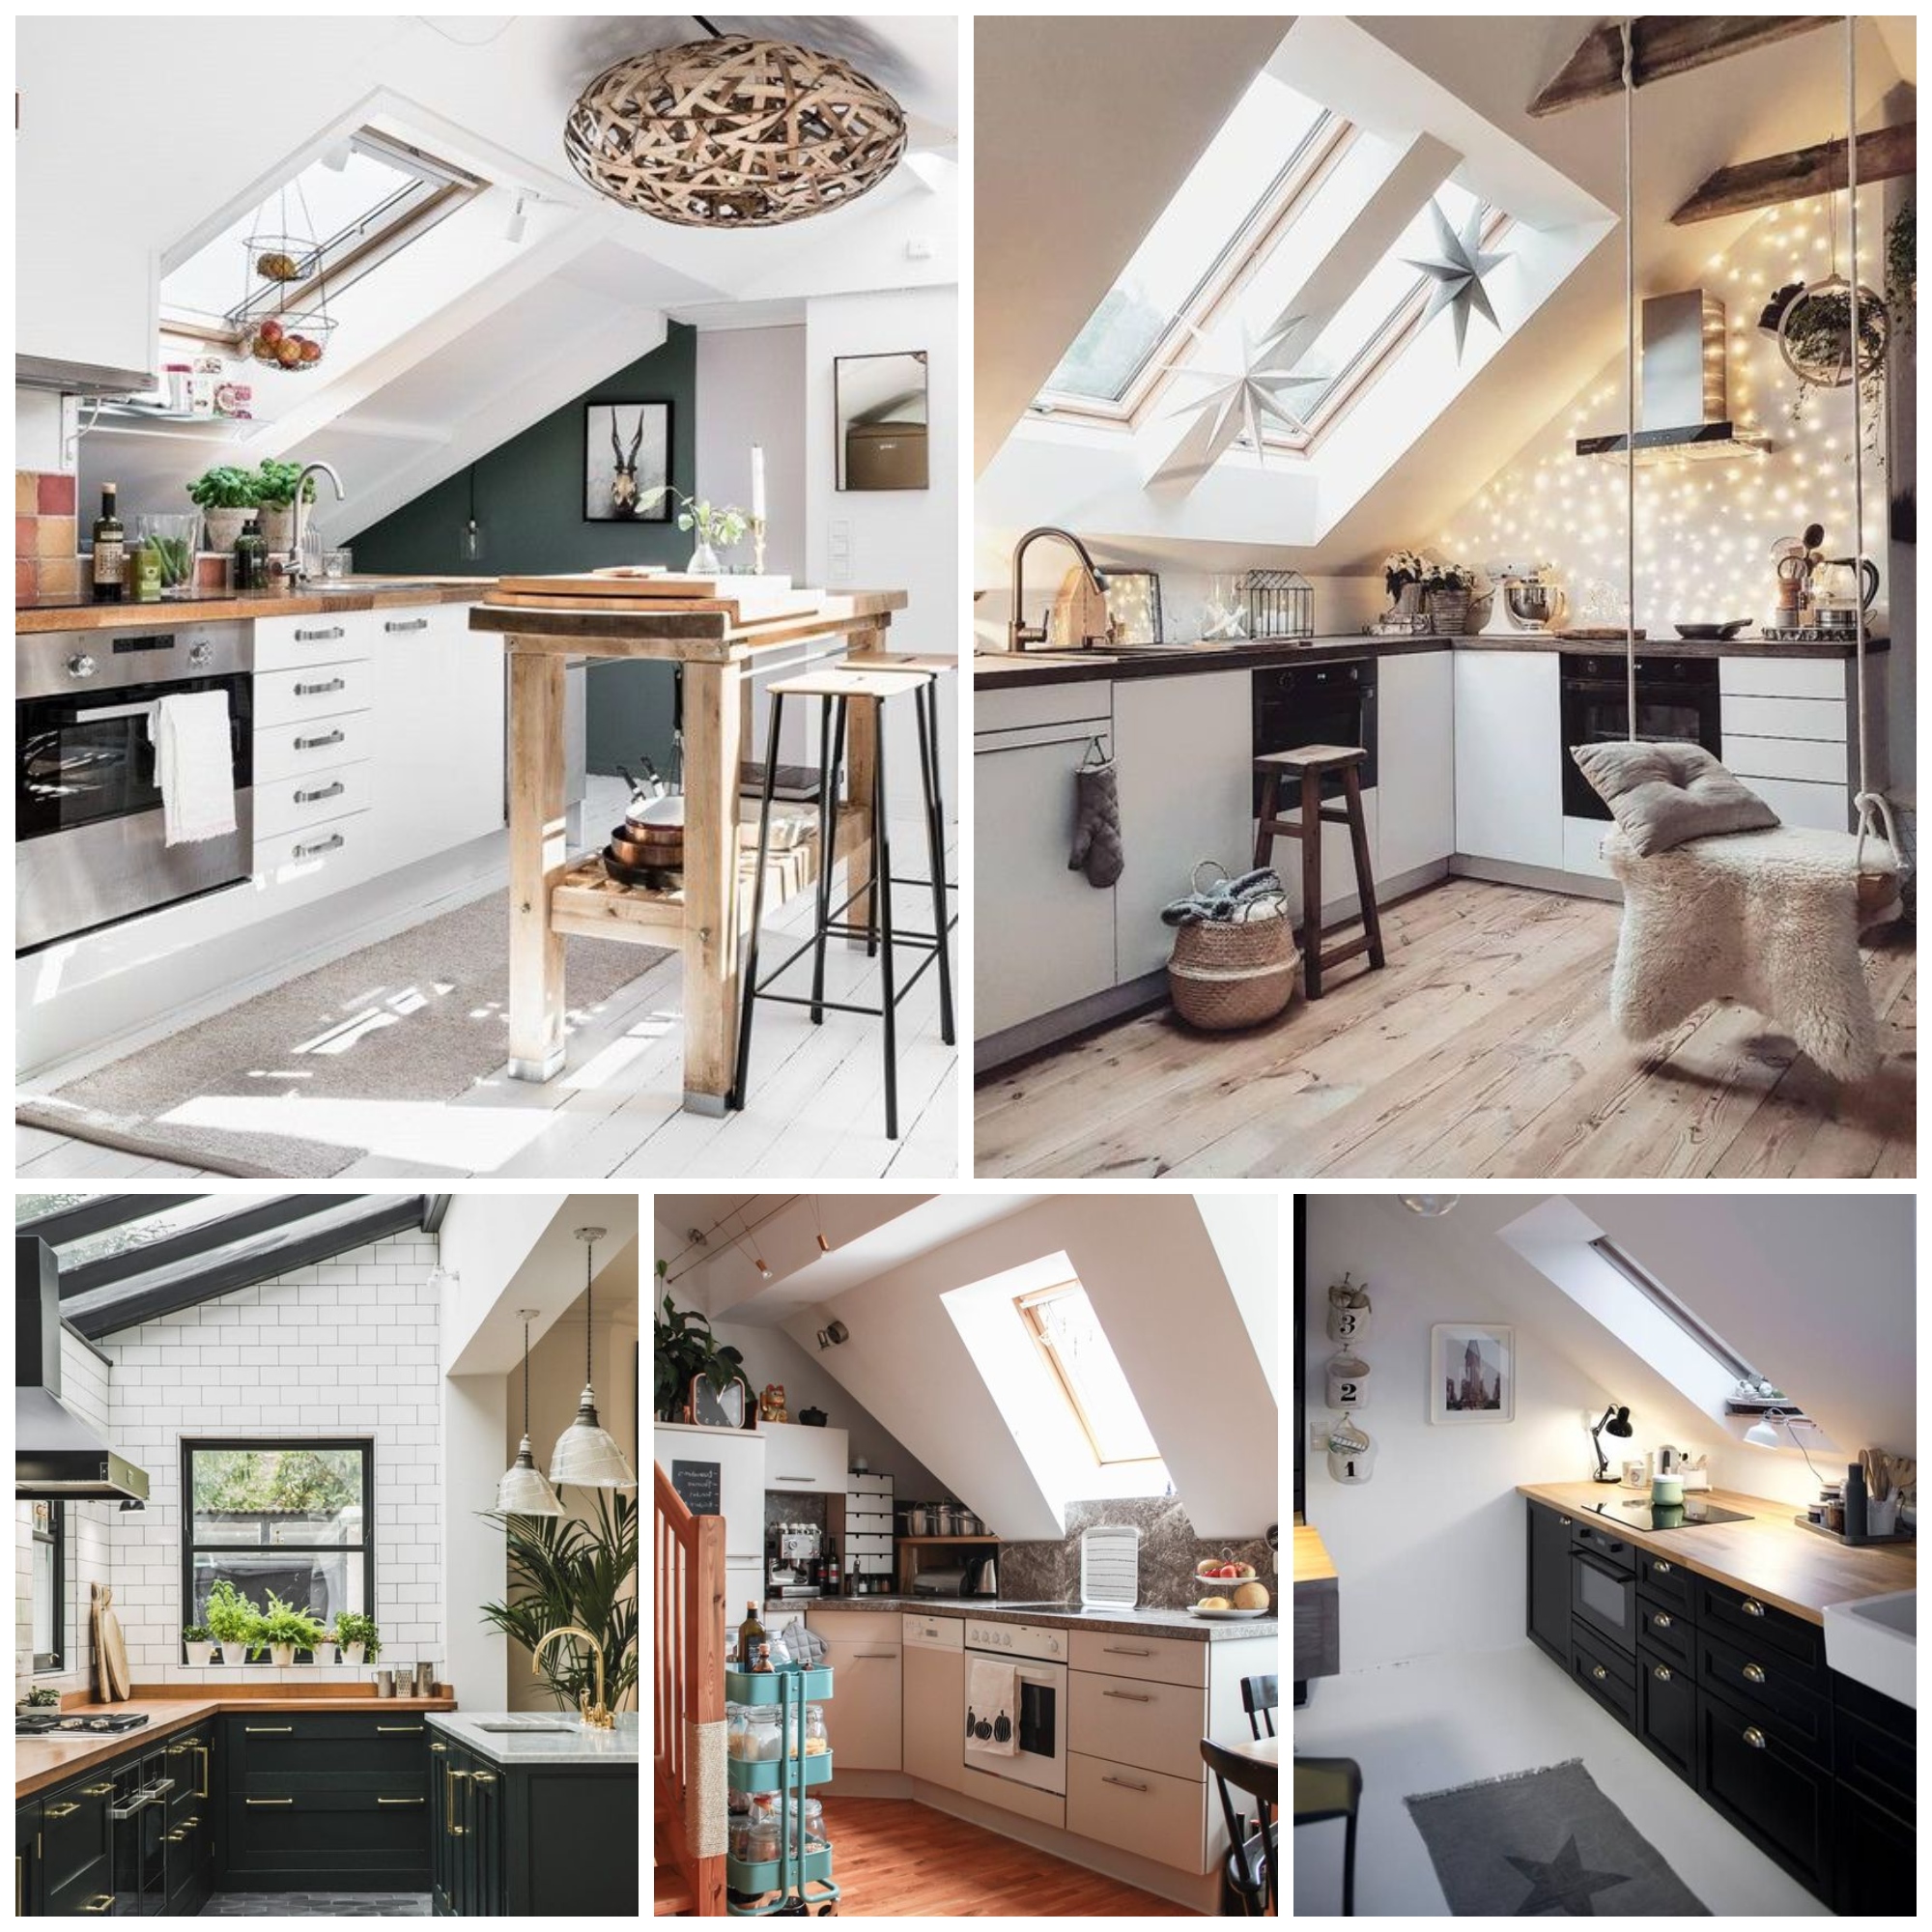 Inspiring And Functional Attic Kitchen Decor Ideas